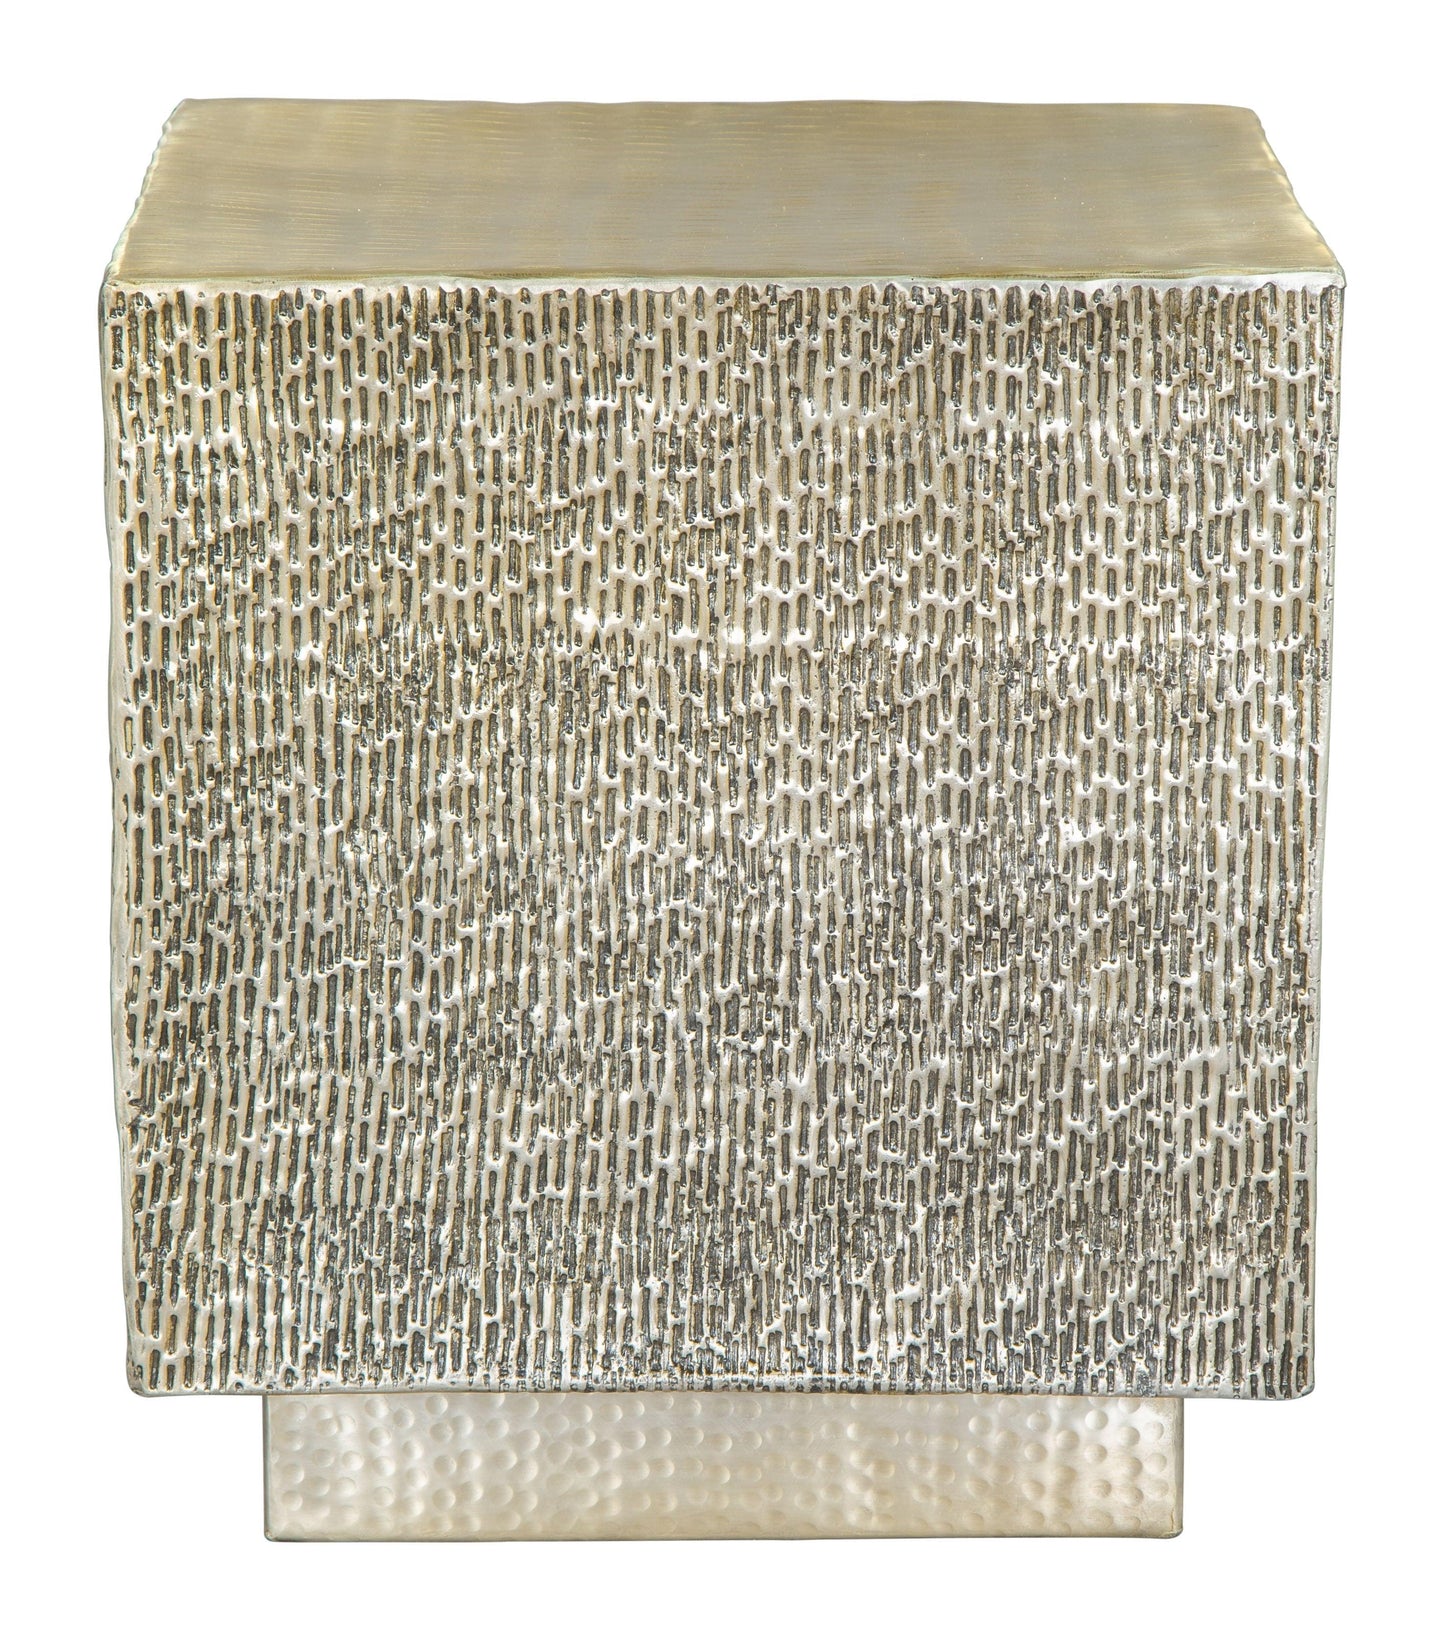 Mono Side Table Gold - Sideboards and Things Accents_Gold, Brand_Zuo Modern, Color_Gold, Depth_10-20, Features_Adjustable Height, Finish_Polished, Height_10-20, Materials_Metal, Metal Type_Aluminum, Product Type_Side Table, Width_10-20